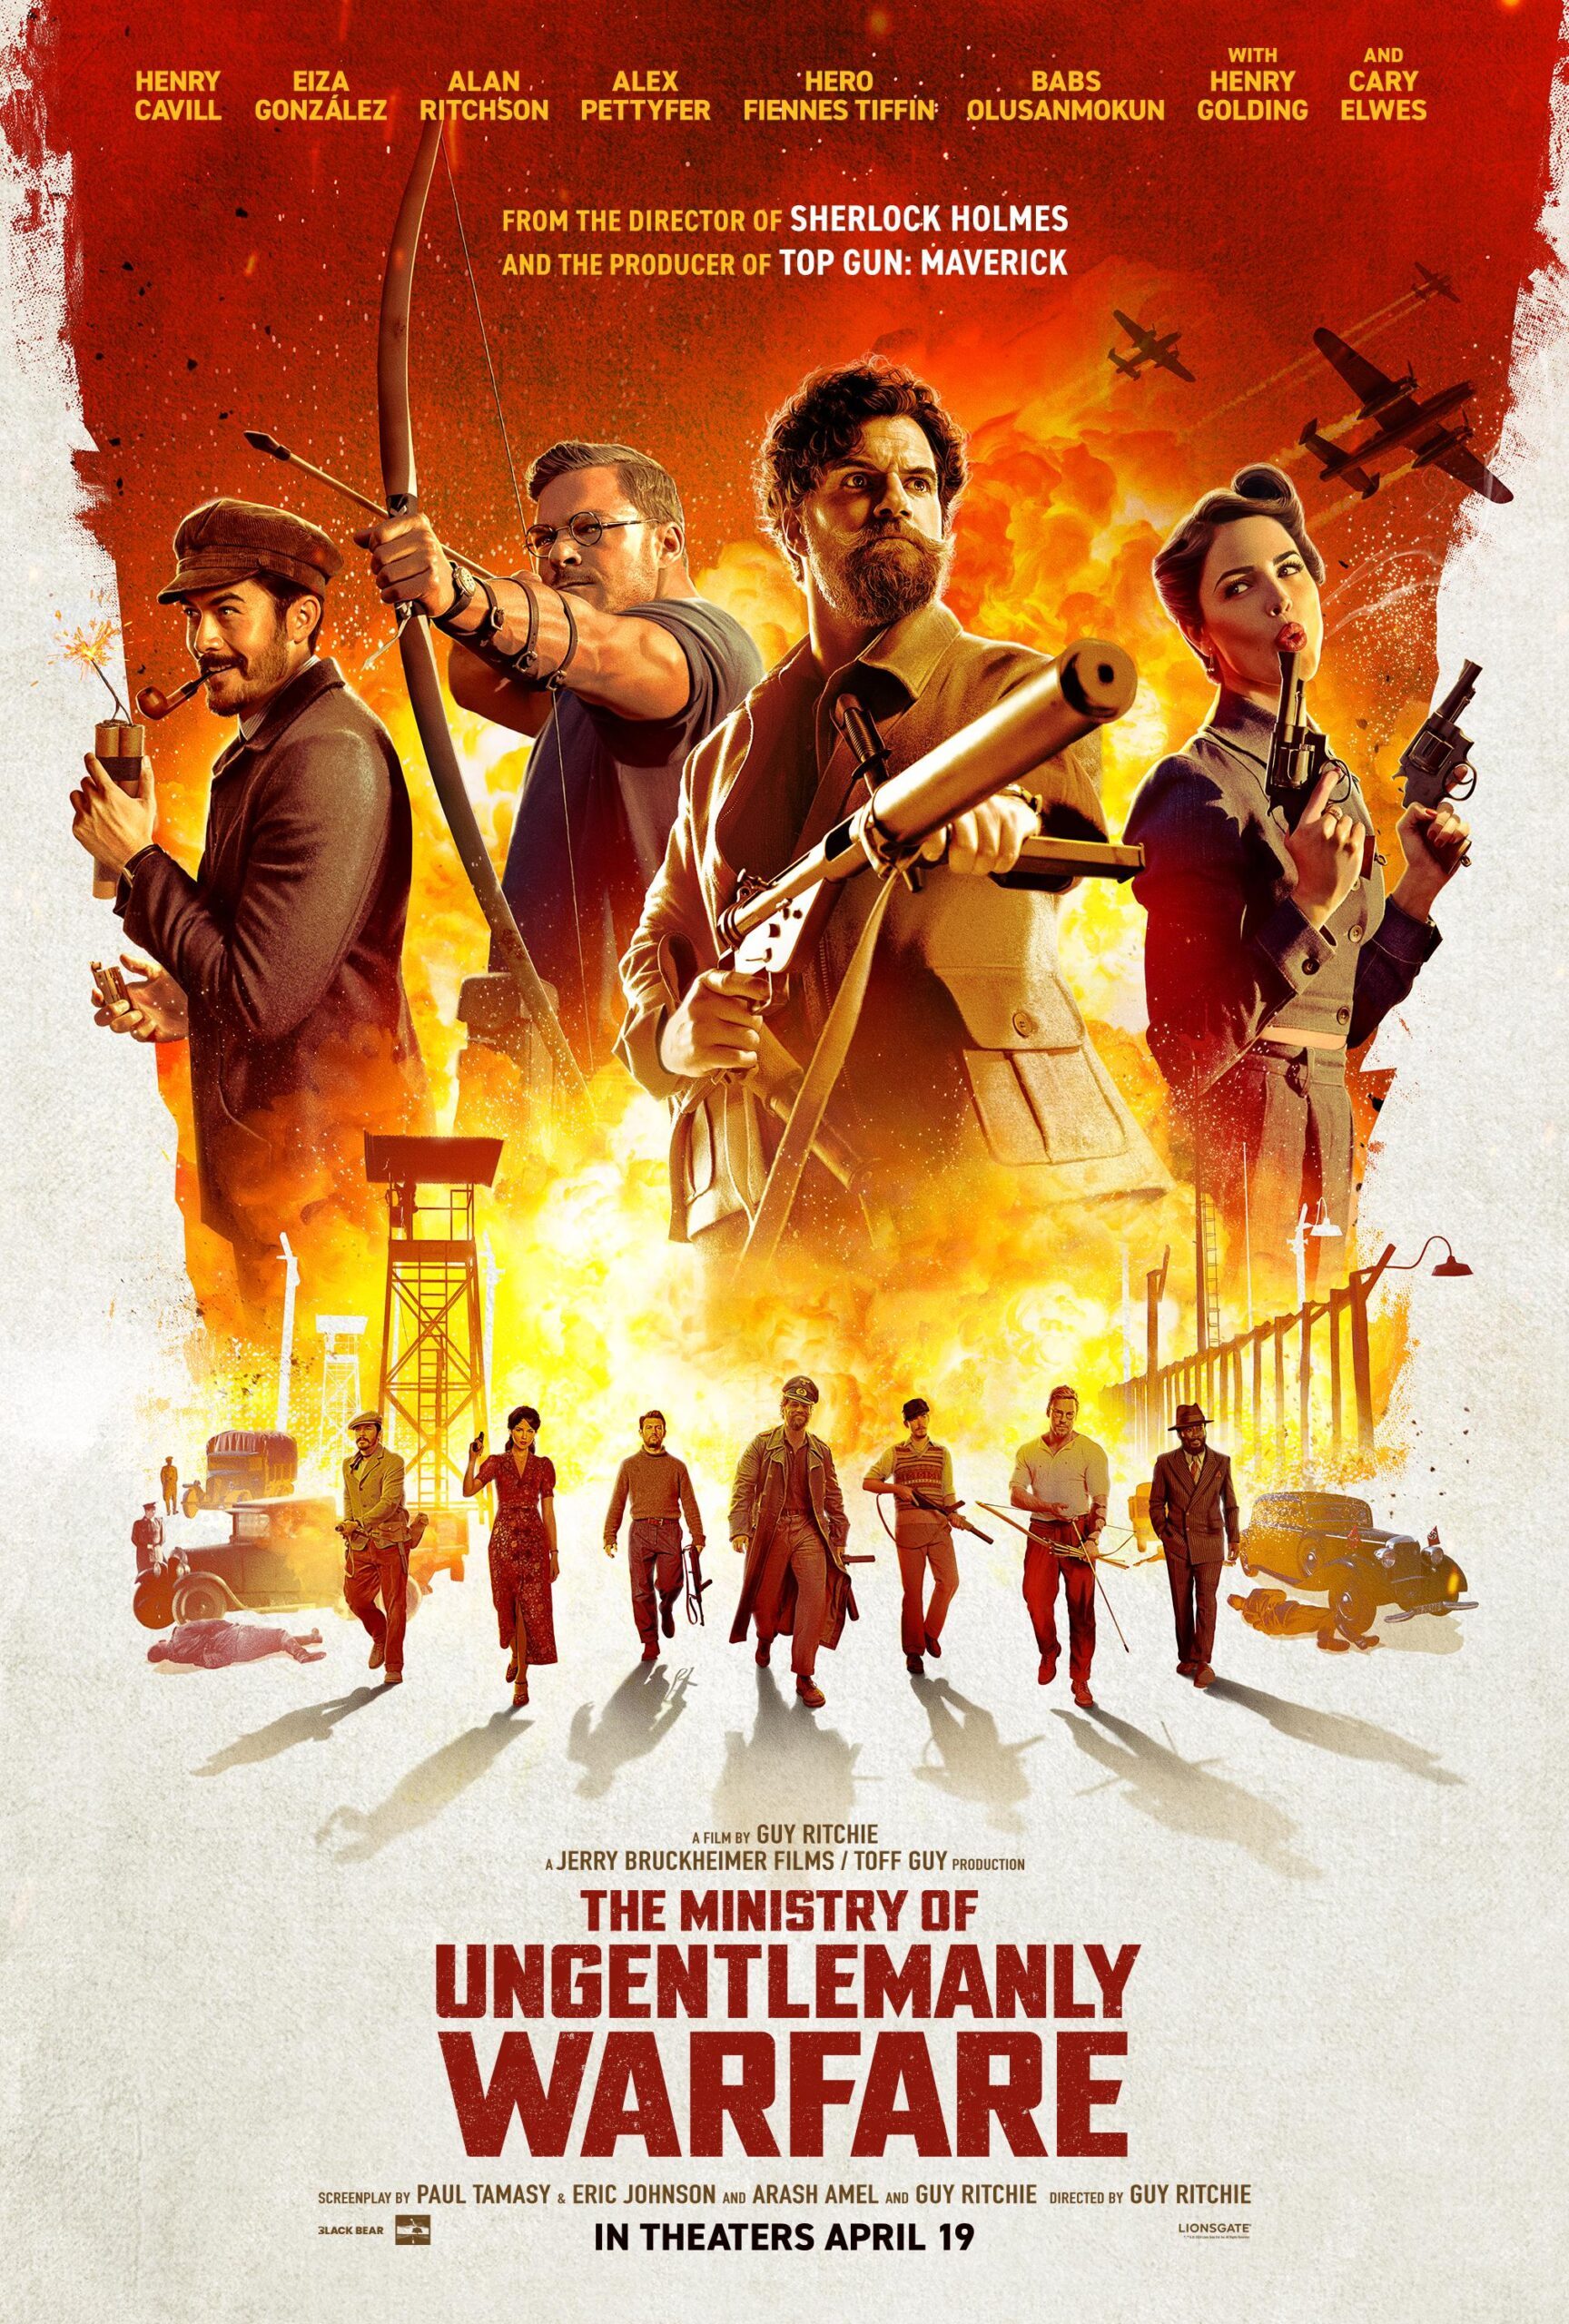 The Ministry Of Ungentlemanly Warfare - Trailer | Prime Video Danmark